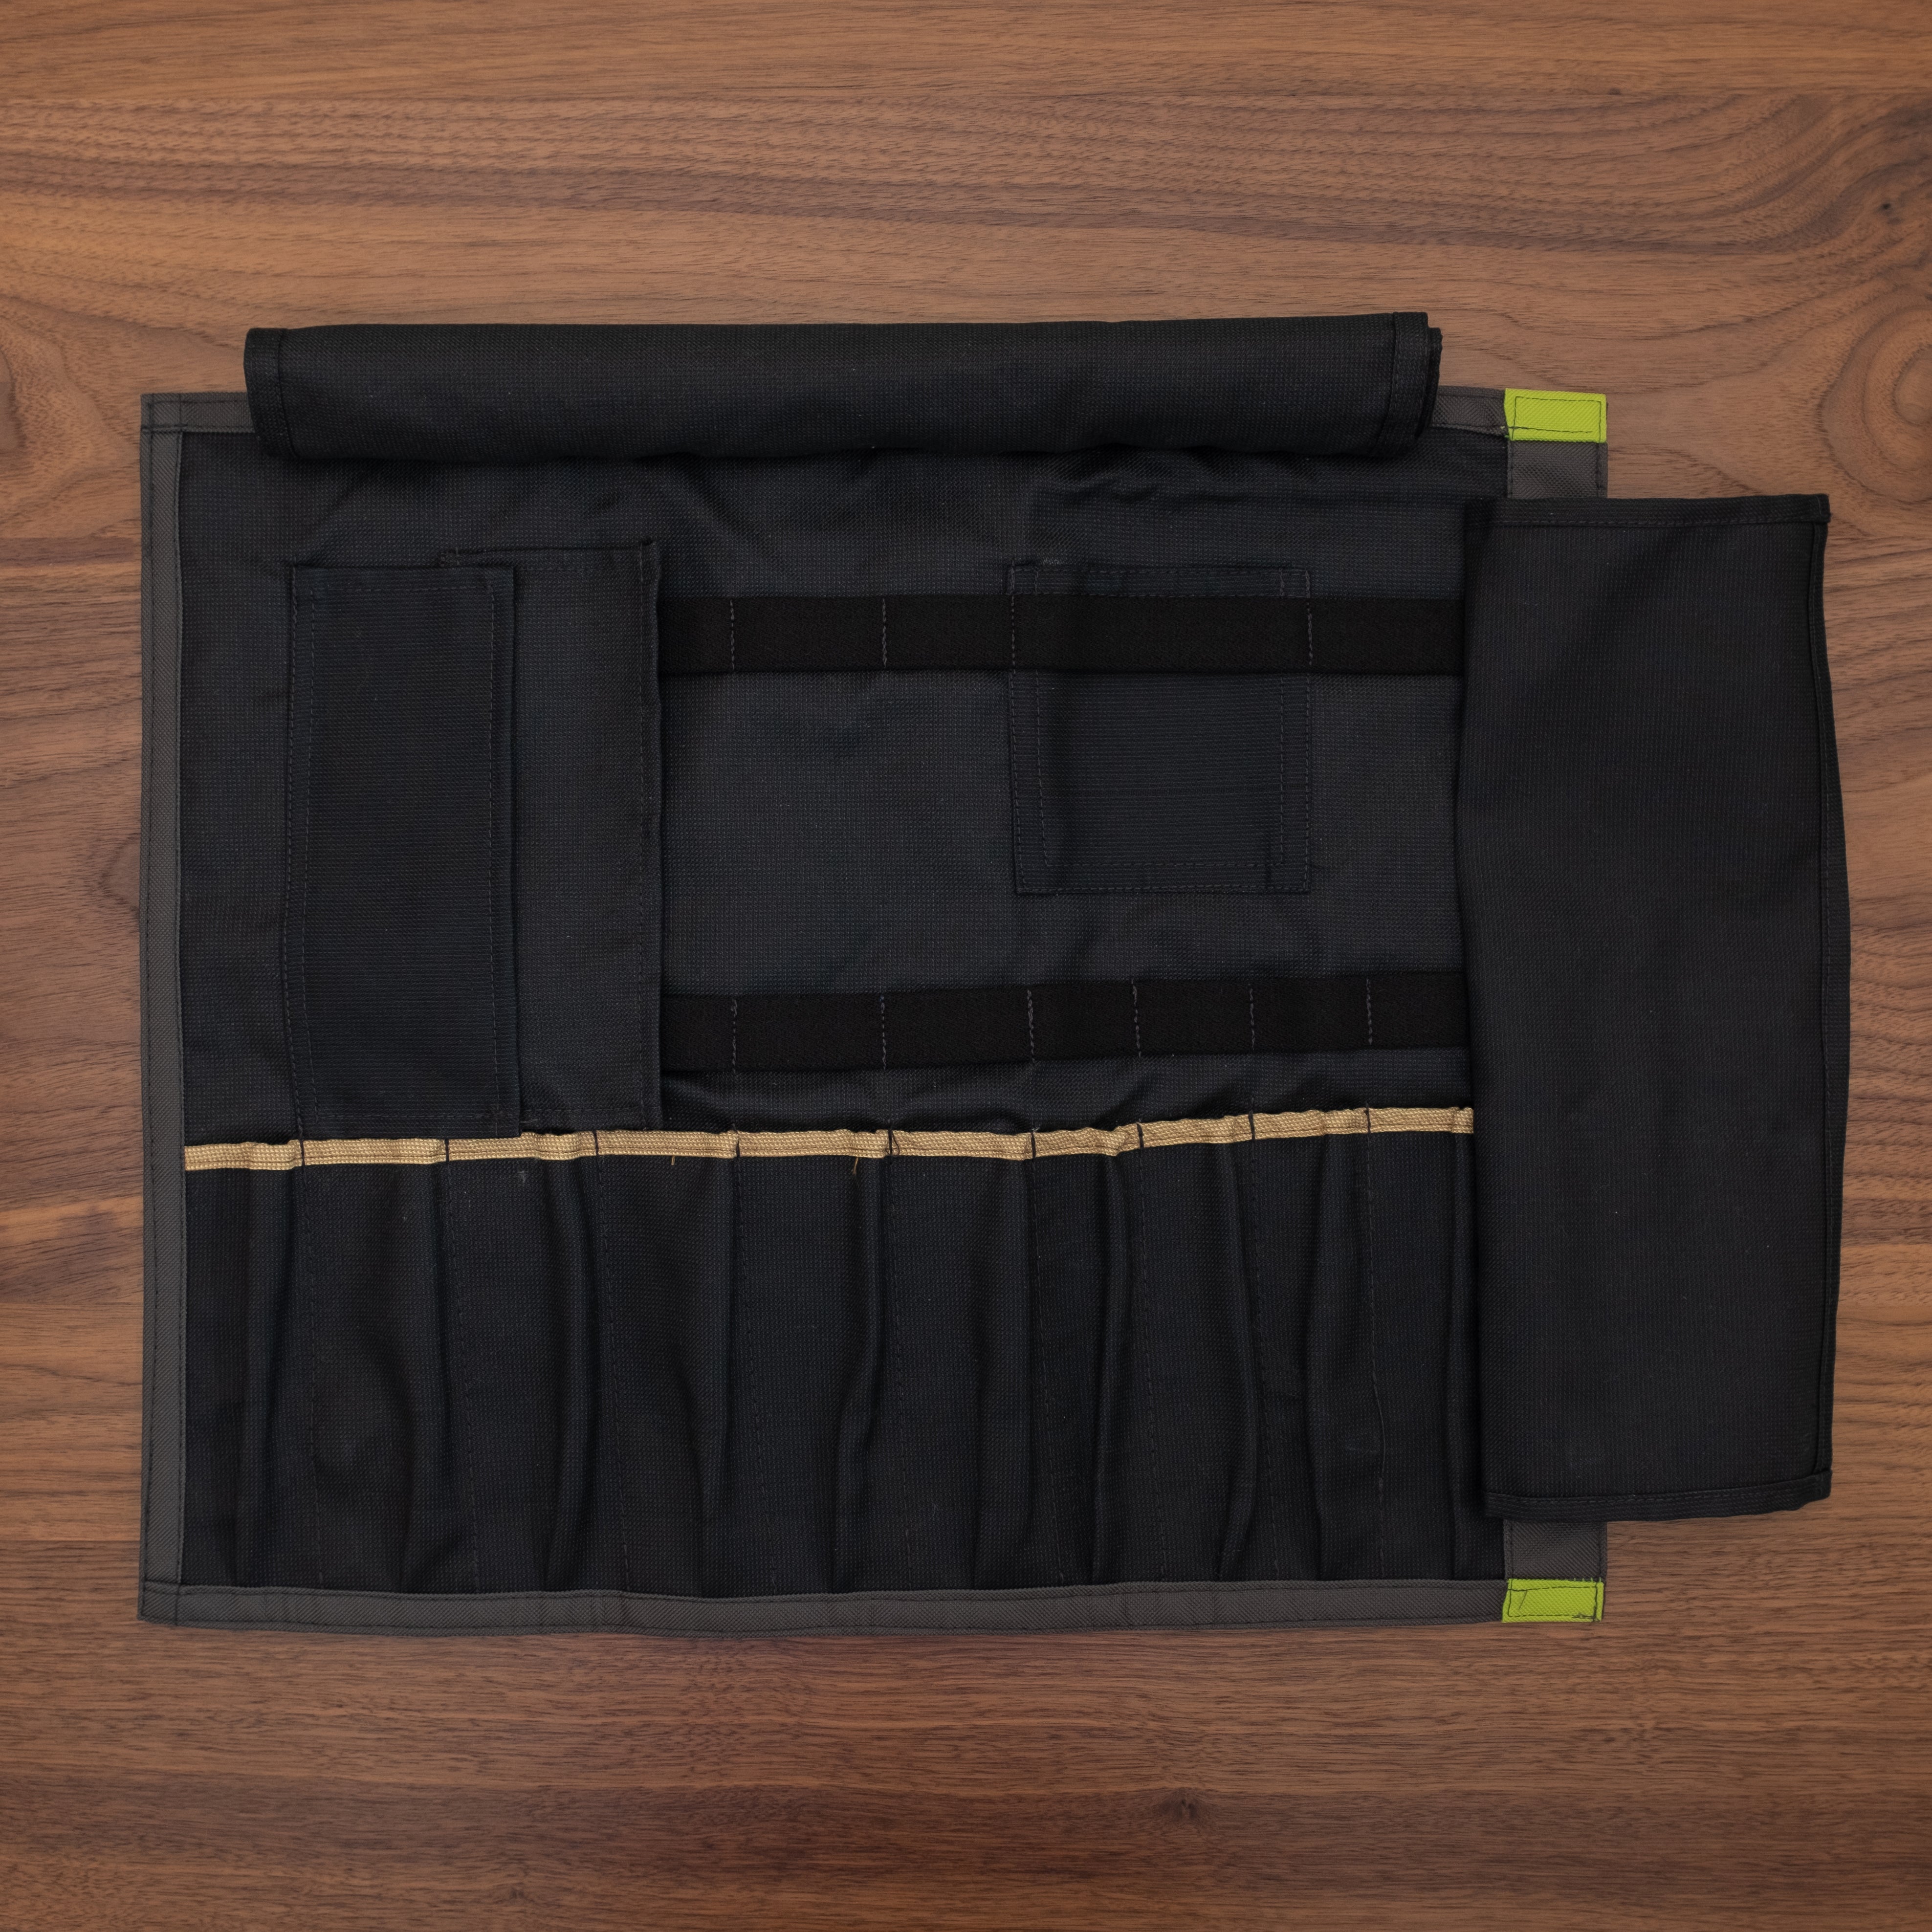 Black interior of the Ottertex Edition/Totally Rad Side Hustle knife  roll laid out flat on a wooden surface. The interior is made of a 50-50 Kevlar/Nomex blend for long lasting protection. Design by Craftmade Aprons in Minnesota.